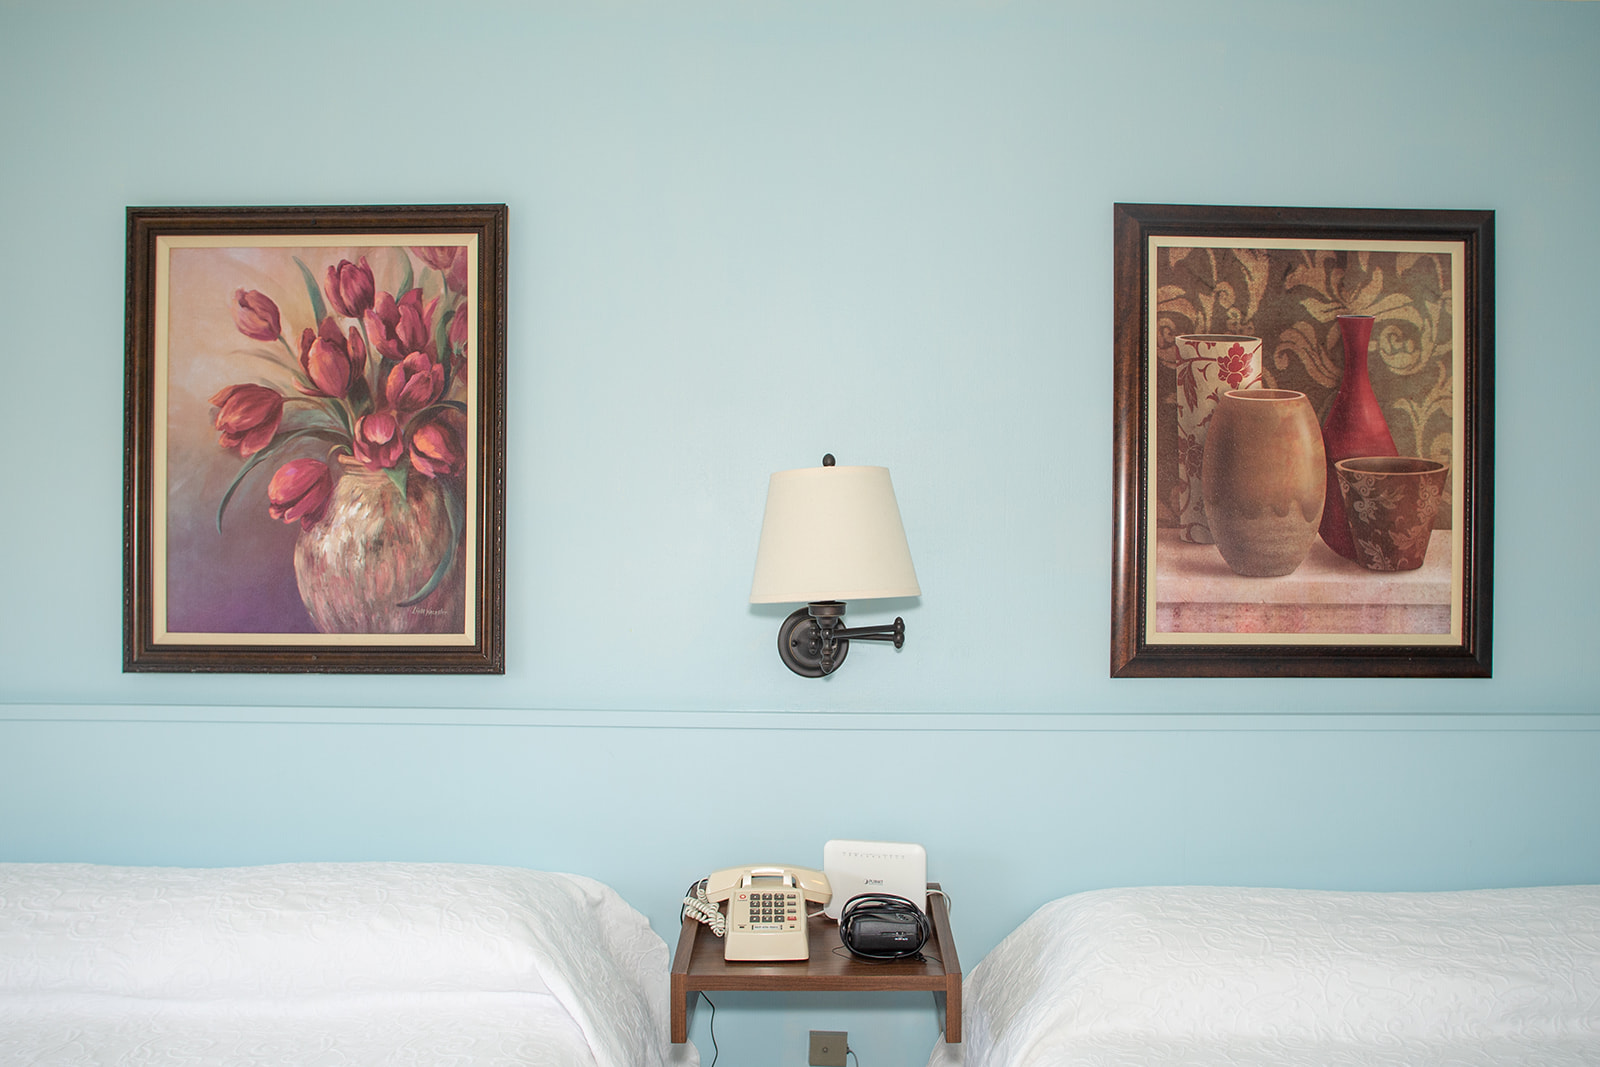 motel room with 2 beds. Paintings of red flowers hang on the walls